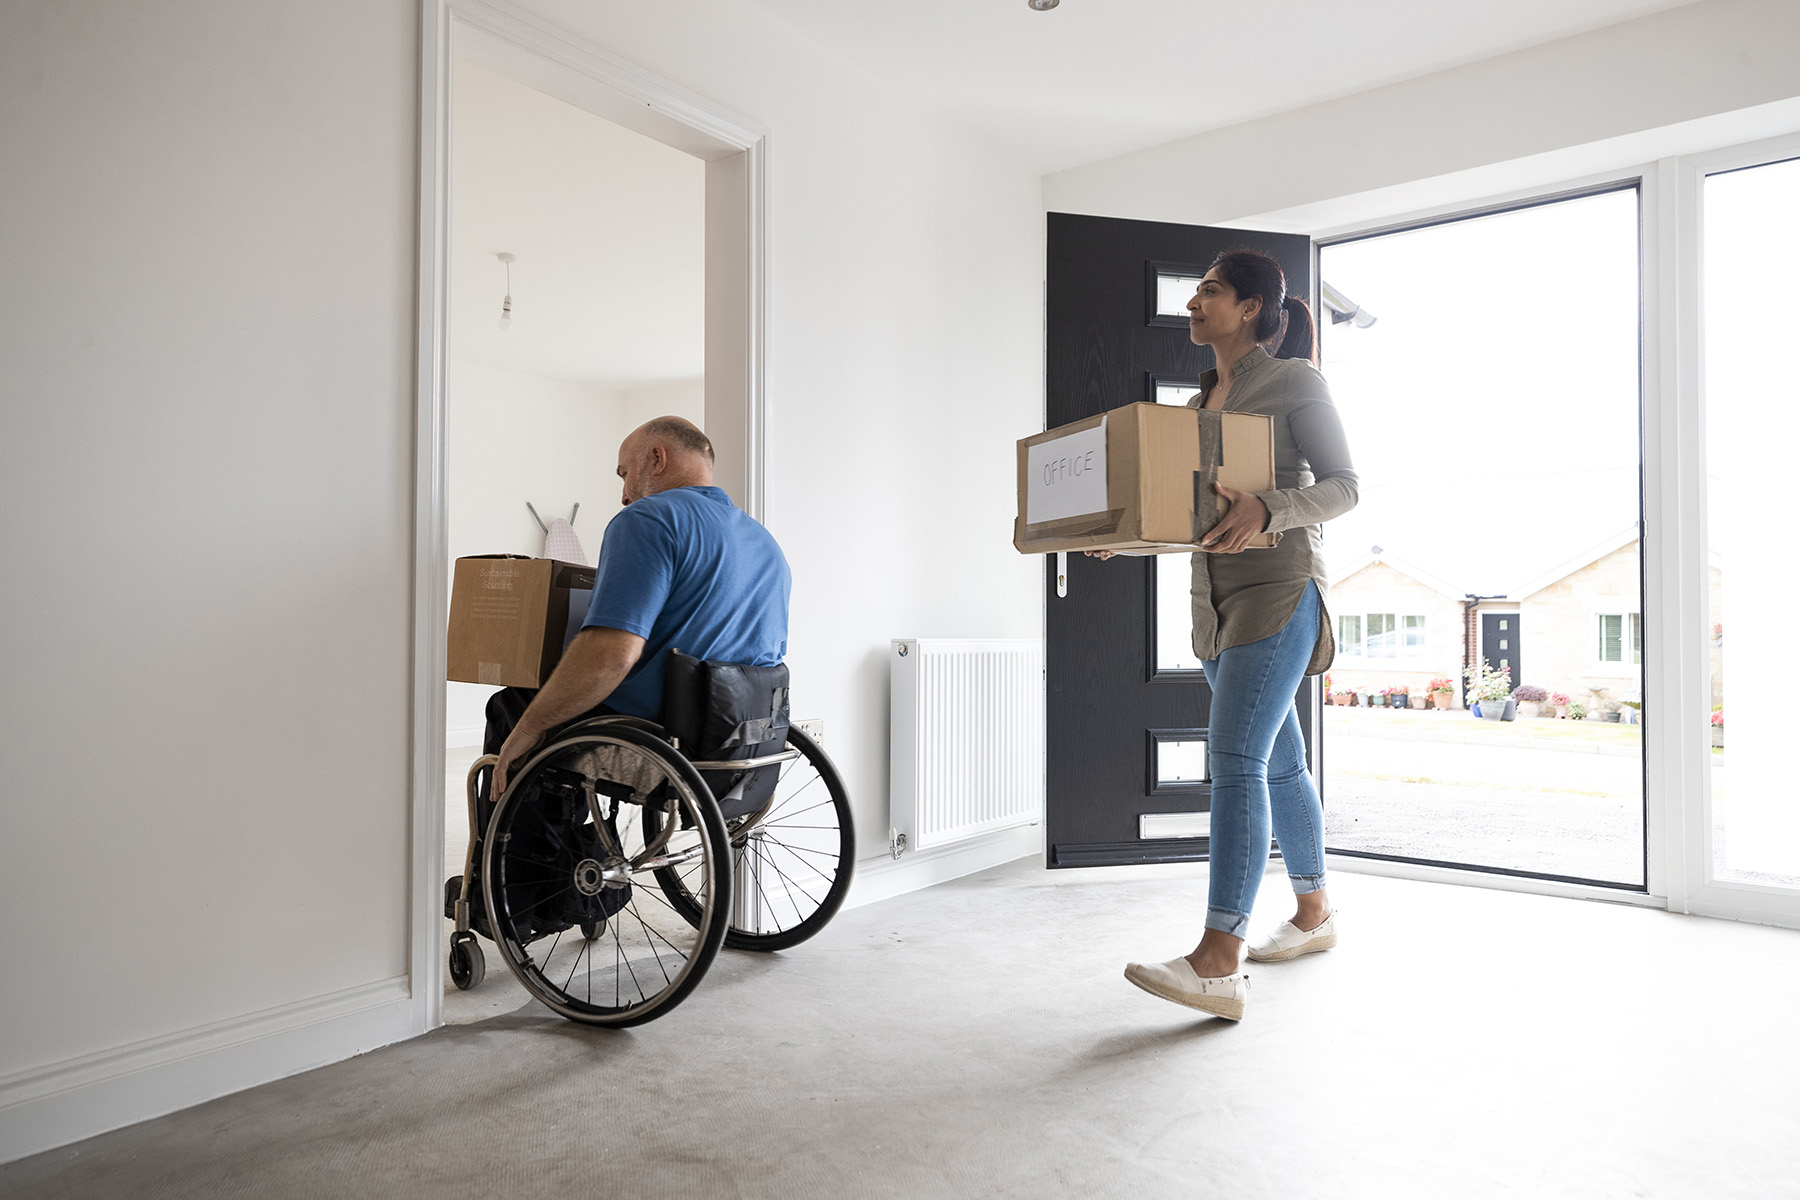 A man who uses a wheelchair goes into an empty, new house carrying a moving box, a woman walks with another box behind him